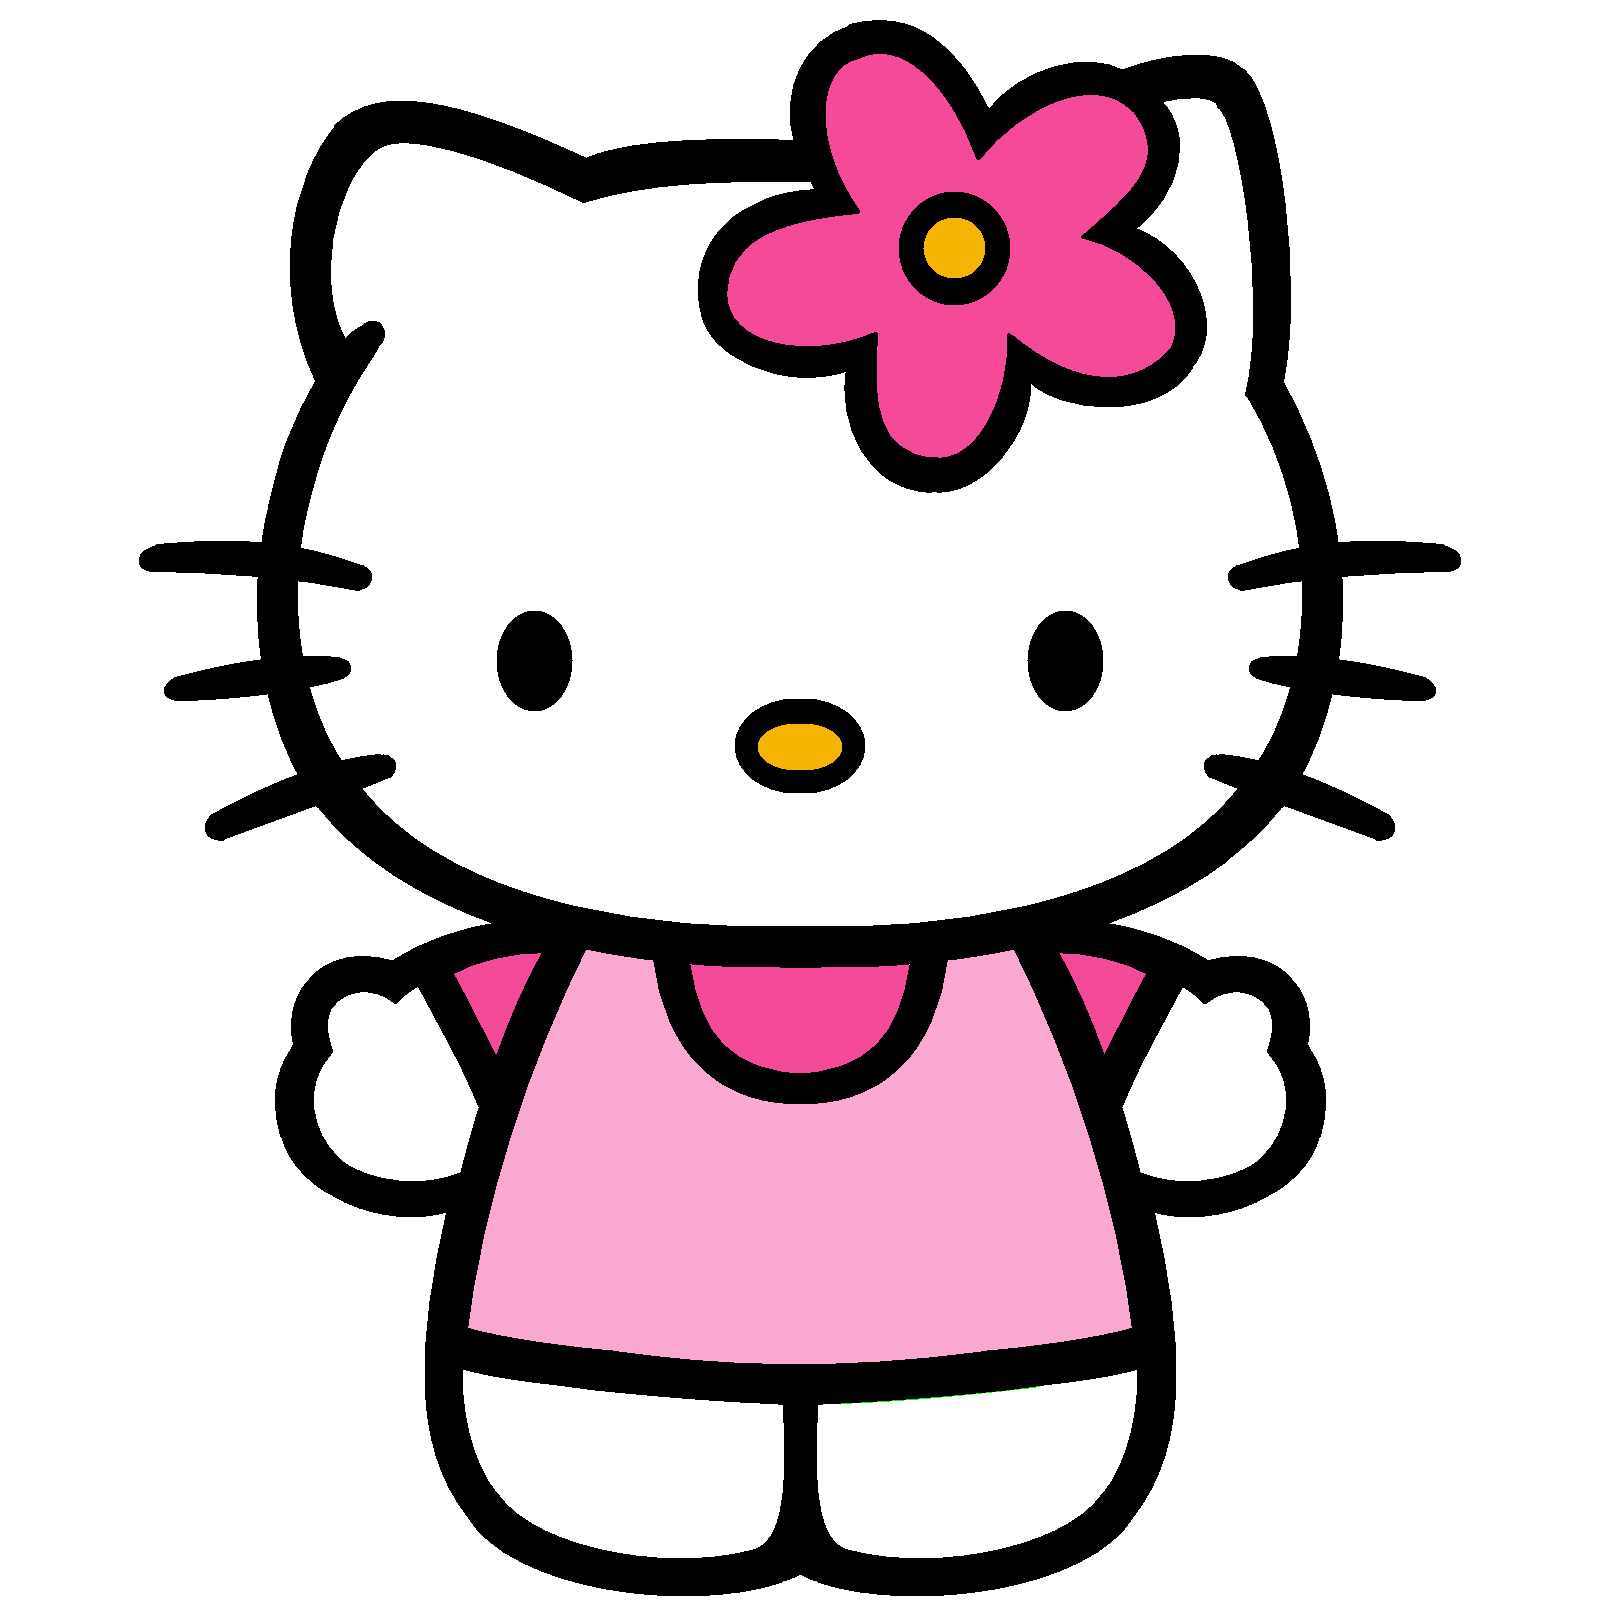 hello-kitty-party-look-at-what-i-made